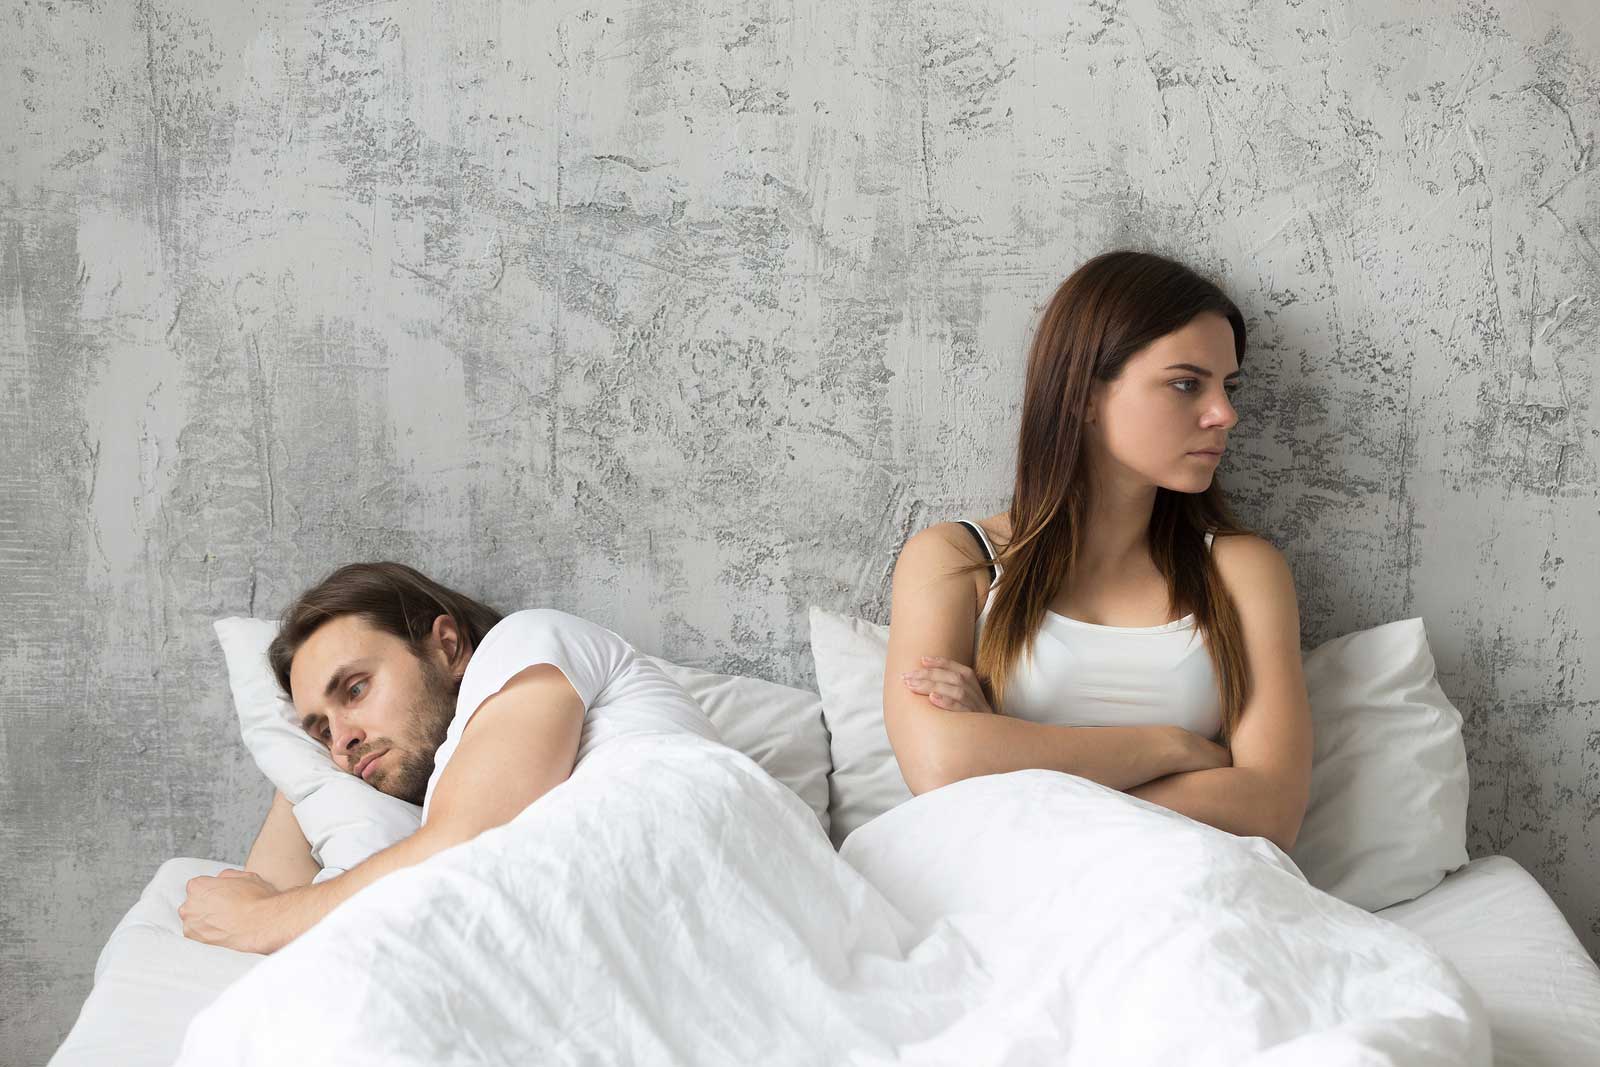 thigns women want men to know - sad couples on bed